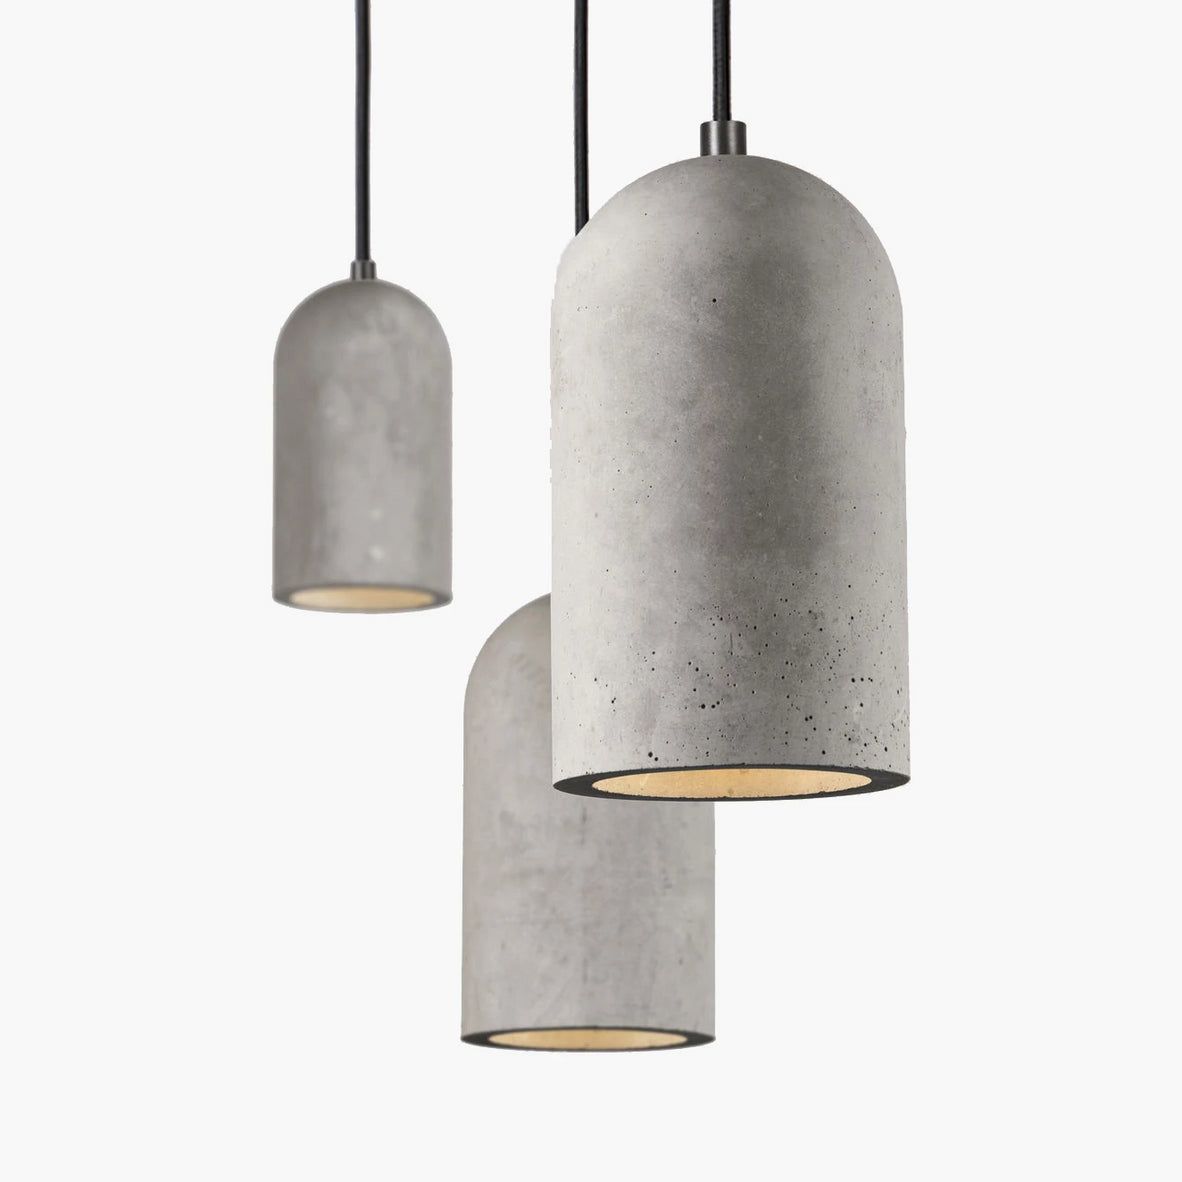 Commercial Pendant Lights Transform Your Space with Stylish Pendant Lighting Options